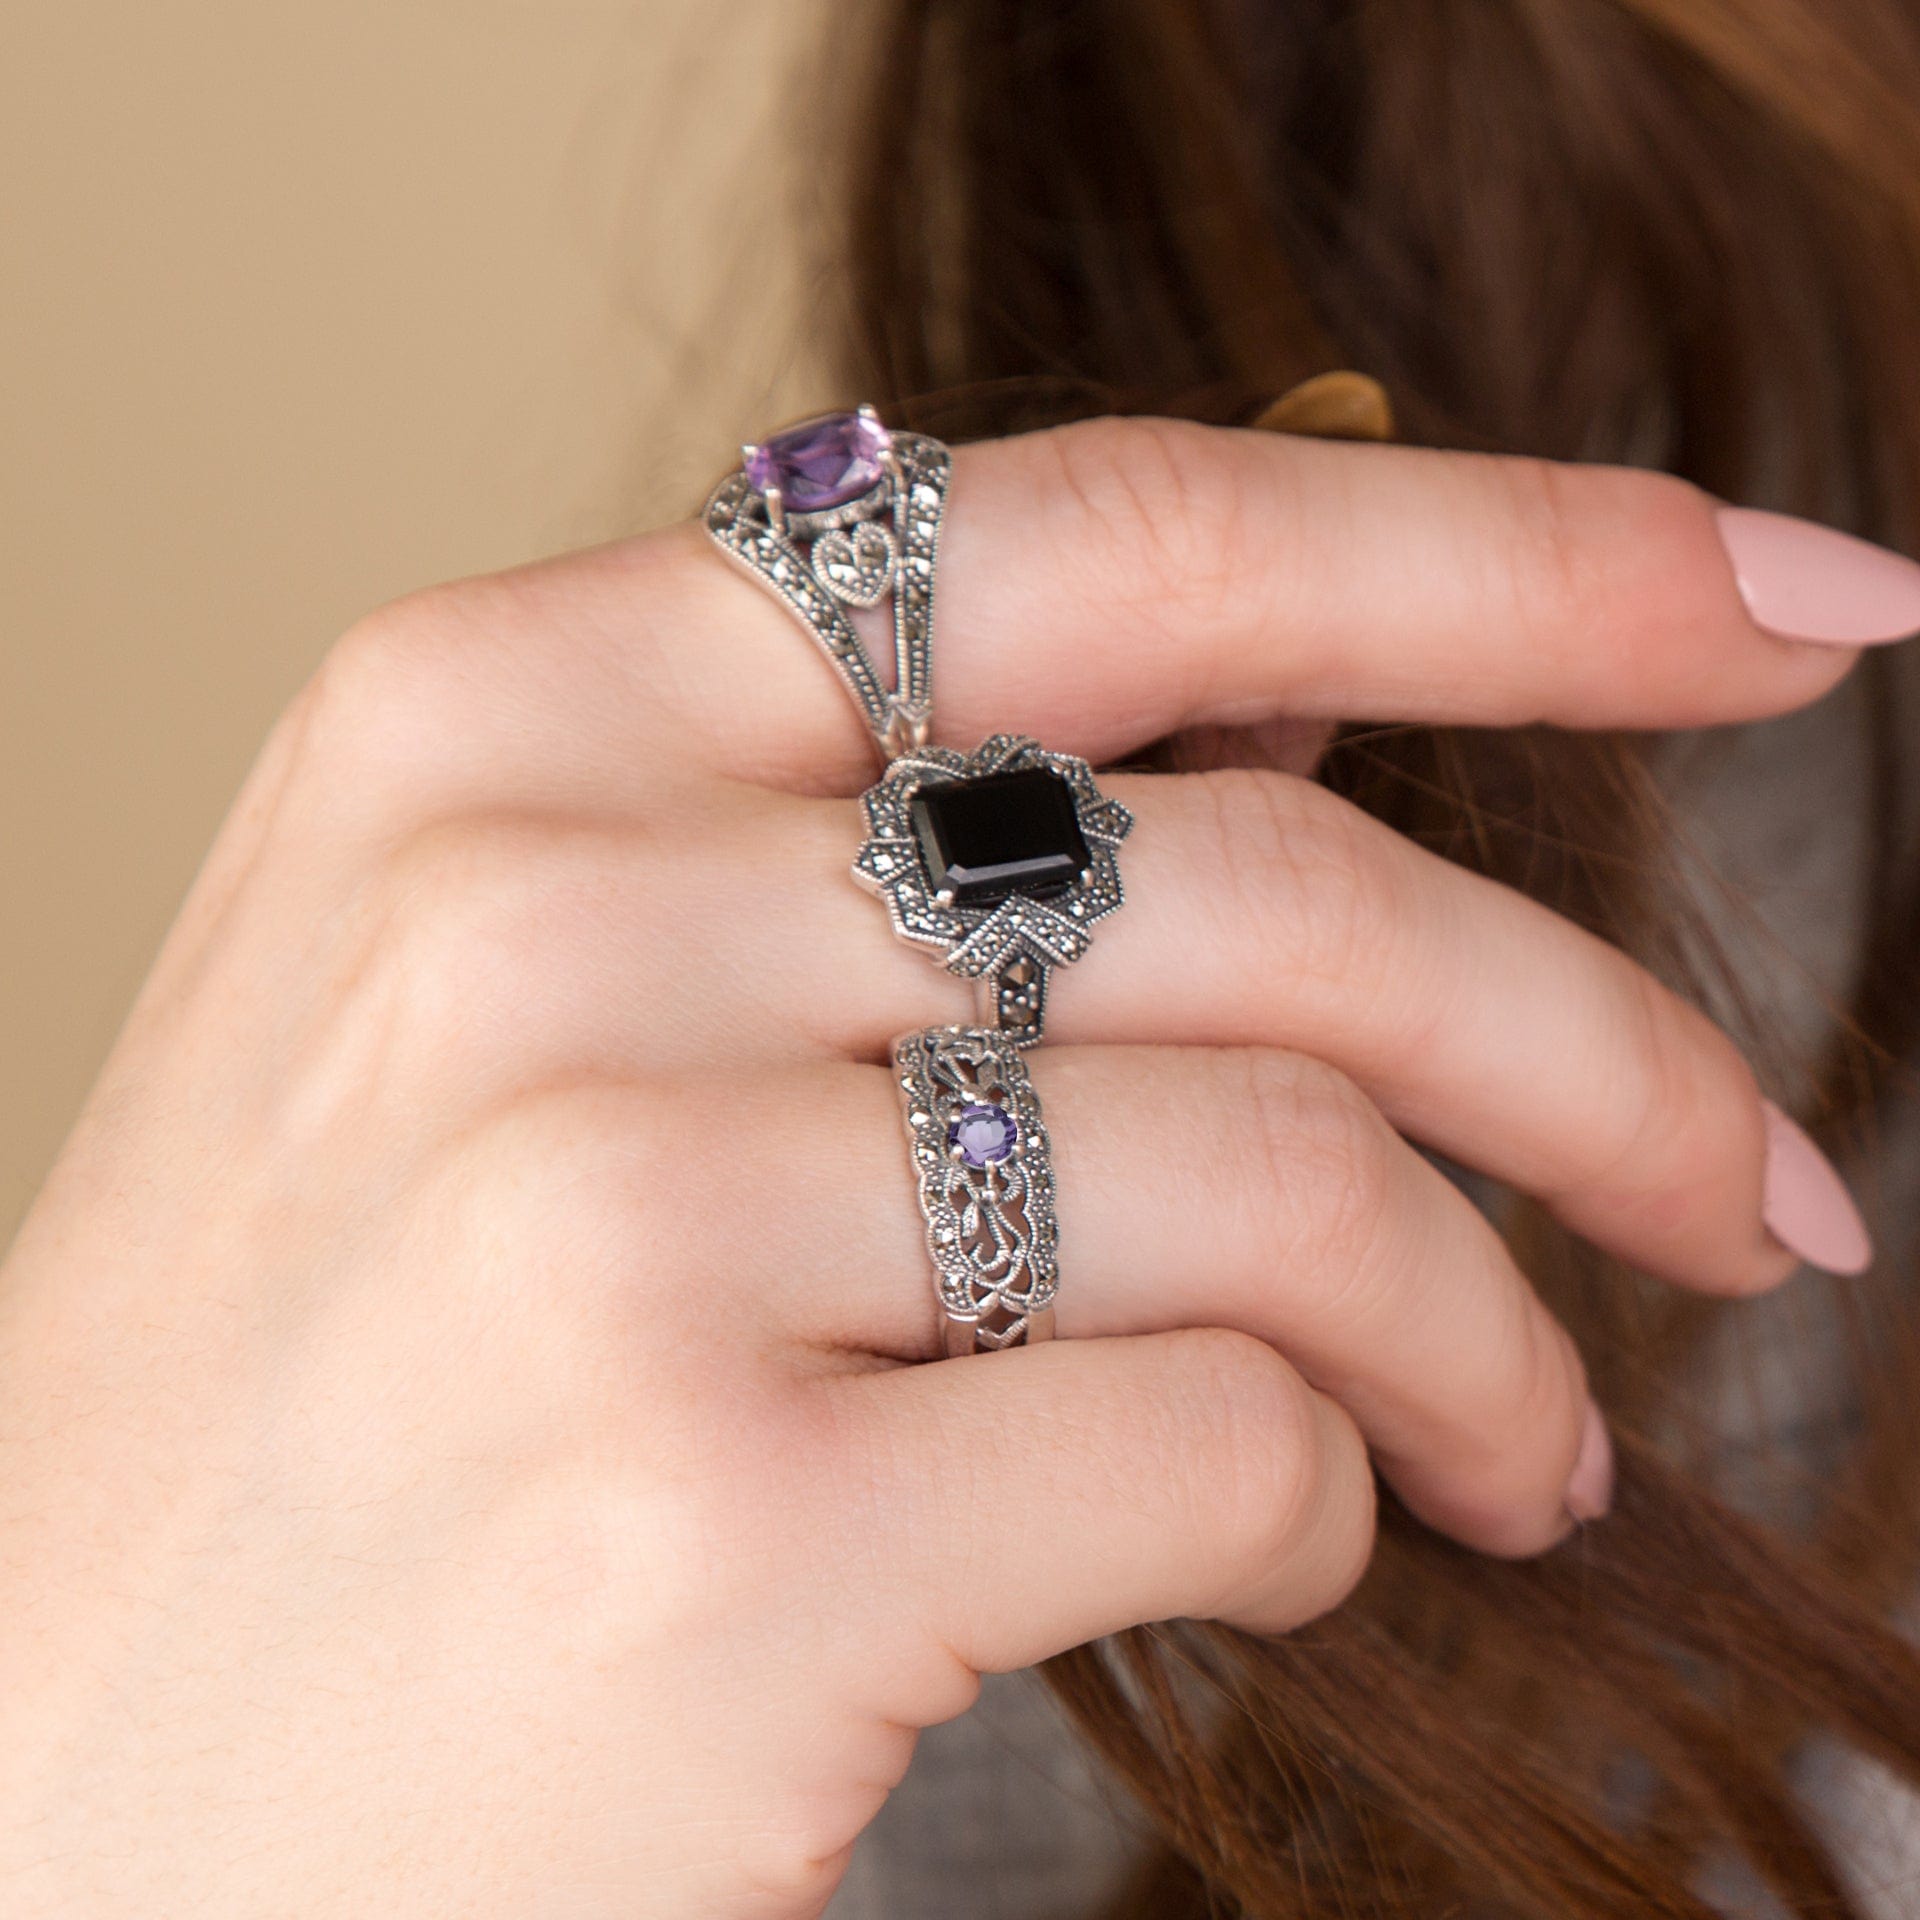 Art Nouveau Style Round Amethyst & Marcasite Floral Band Ring in 925 Sterling Silver - Gemondo